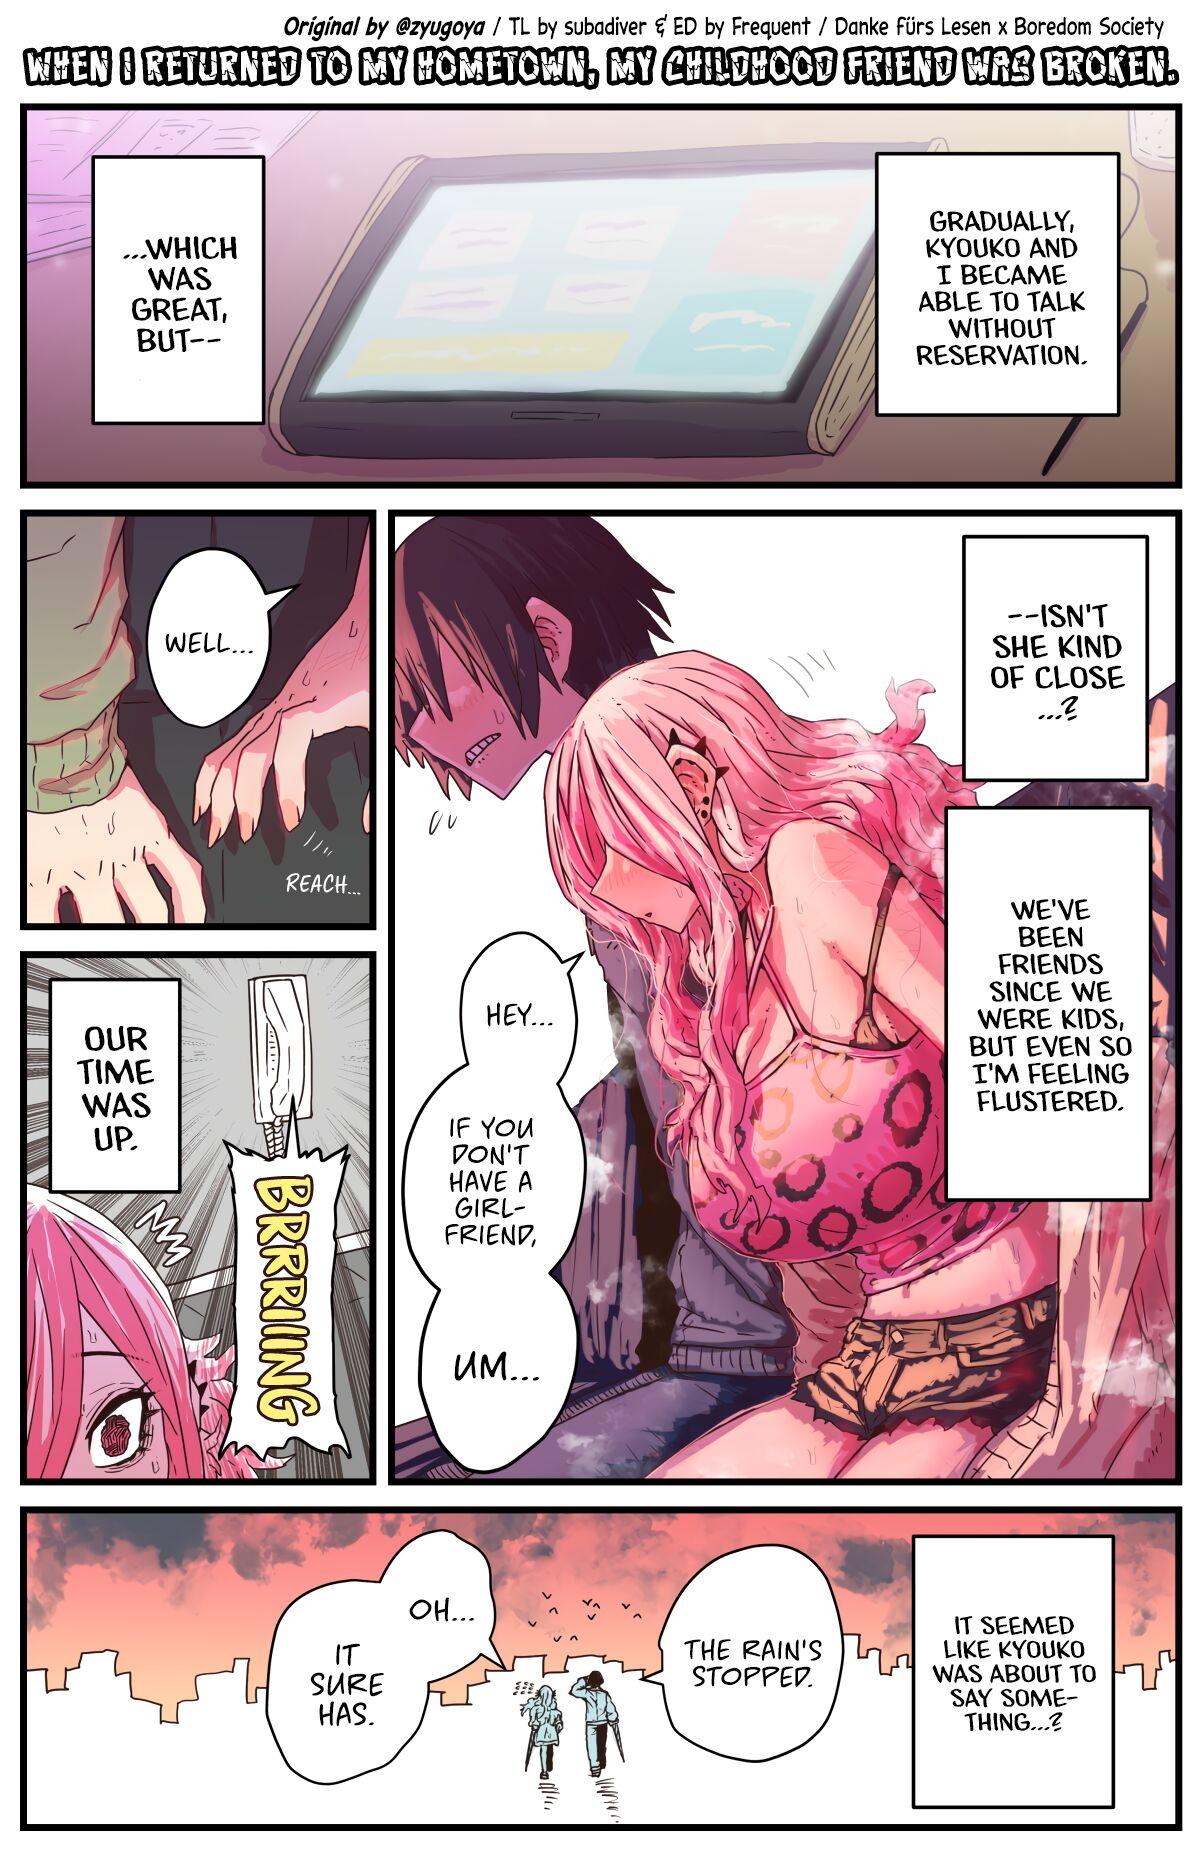 Buttfucking When I Returned to My Hometown, My Childhood Friend was Broken - Original First - Page 10